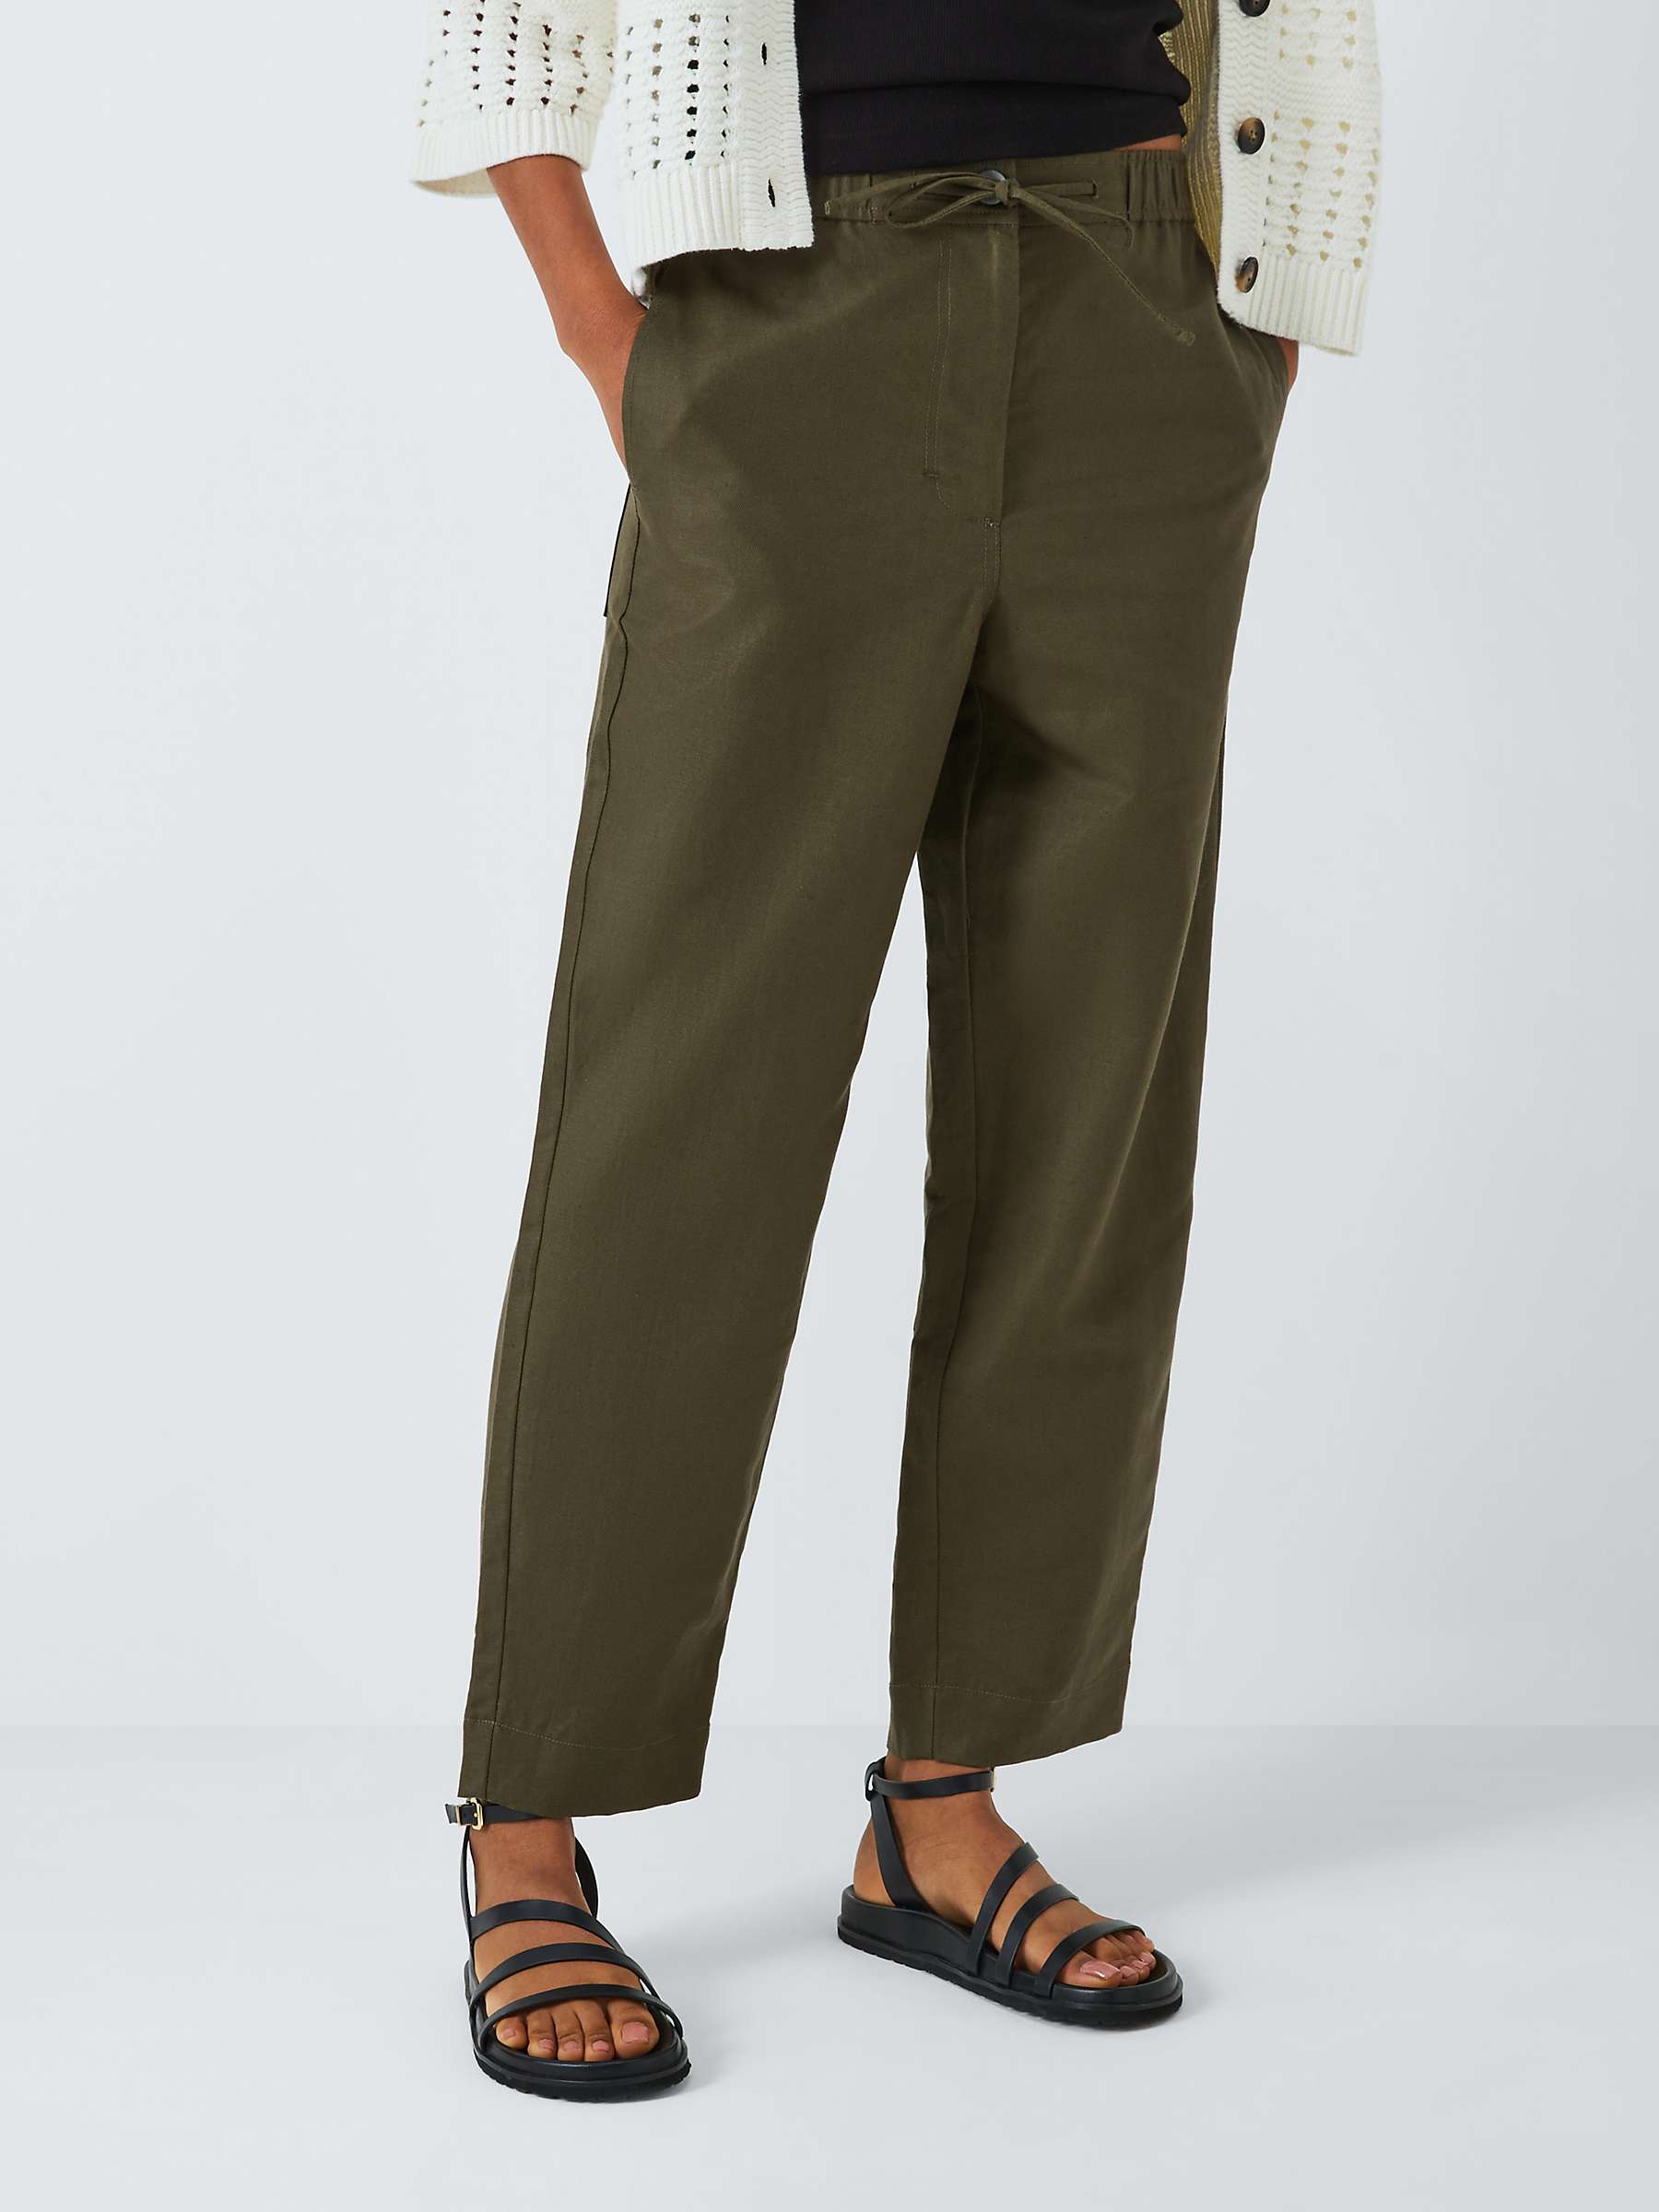 Buy John Lewis Cotton and Linen Blend Drawstring Trousers Online at johnlewis.com